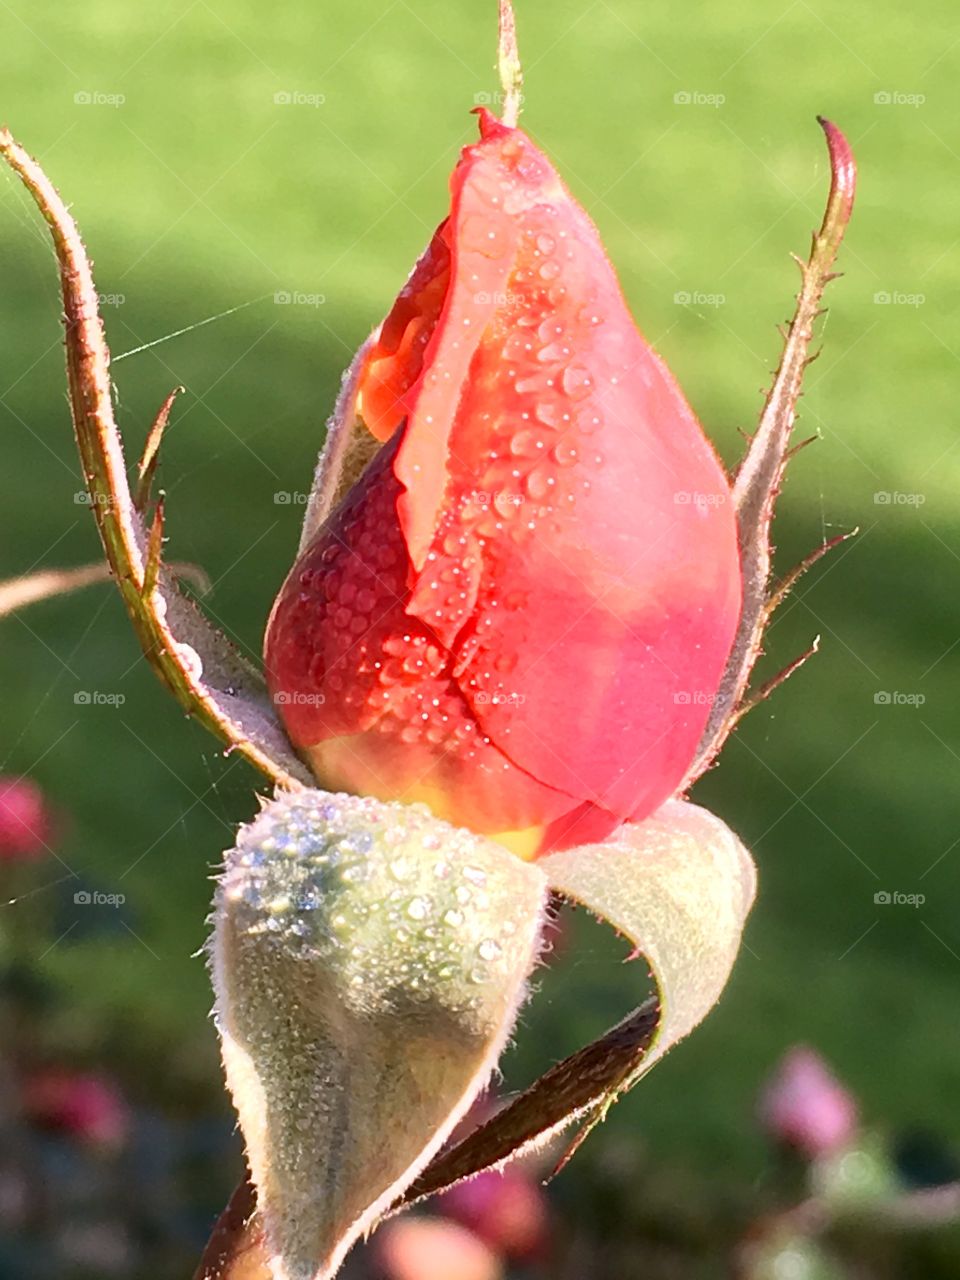 Morning dew on an unopened rose as it awaits to blossom into it’s full, beautiful self